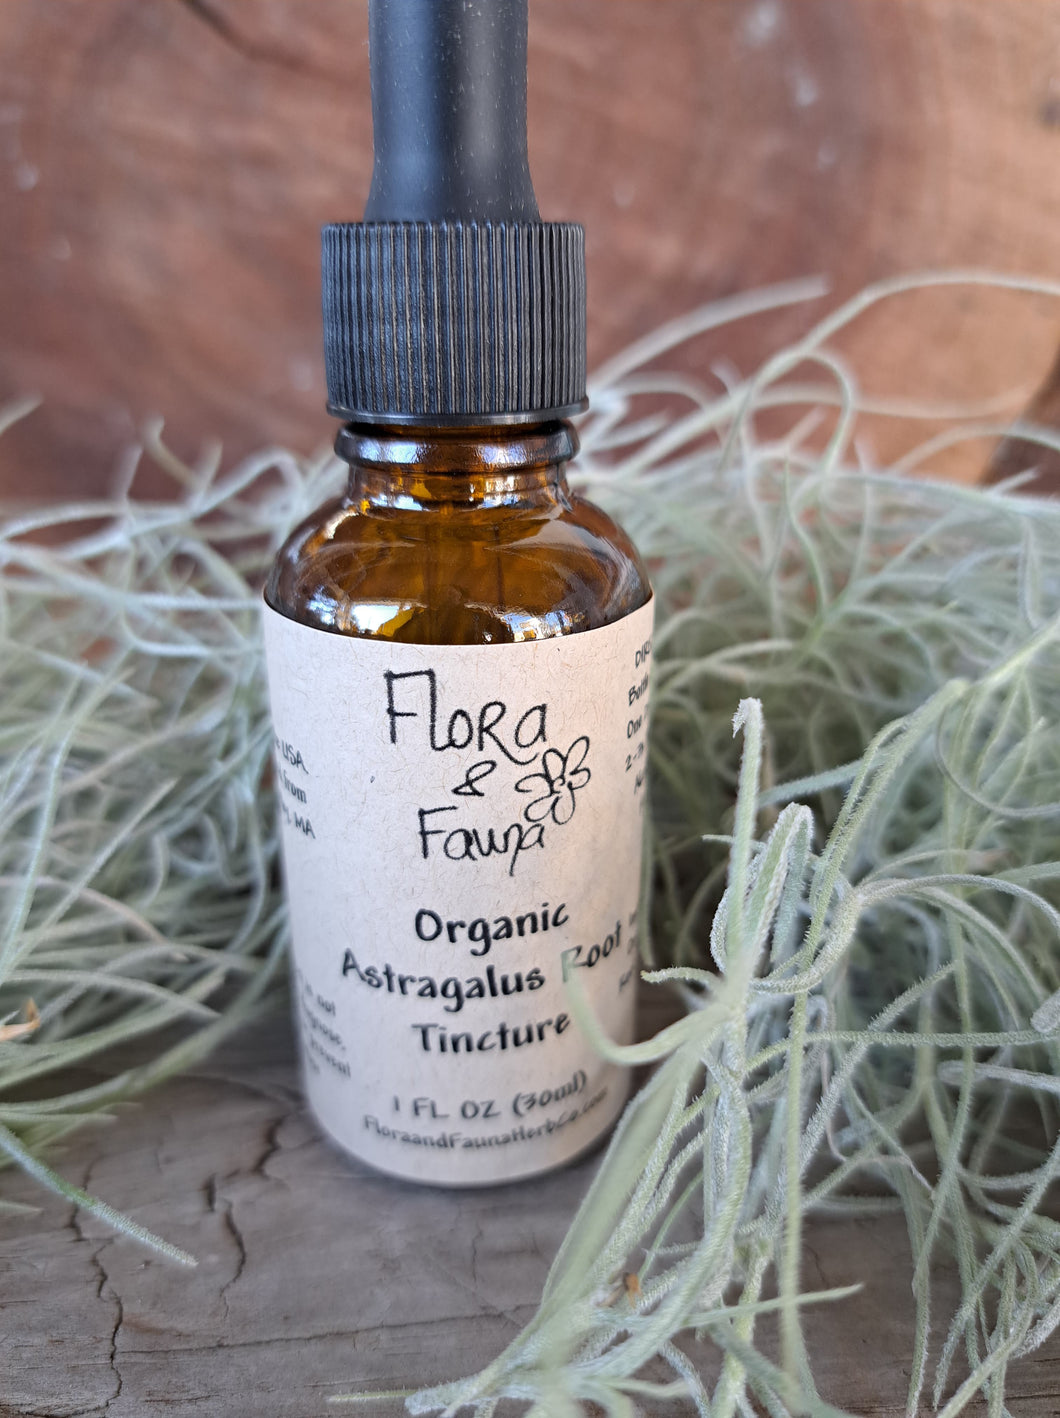 Astragalus Root Tincture/Extract